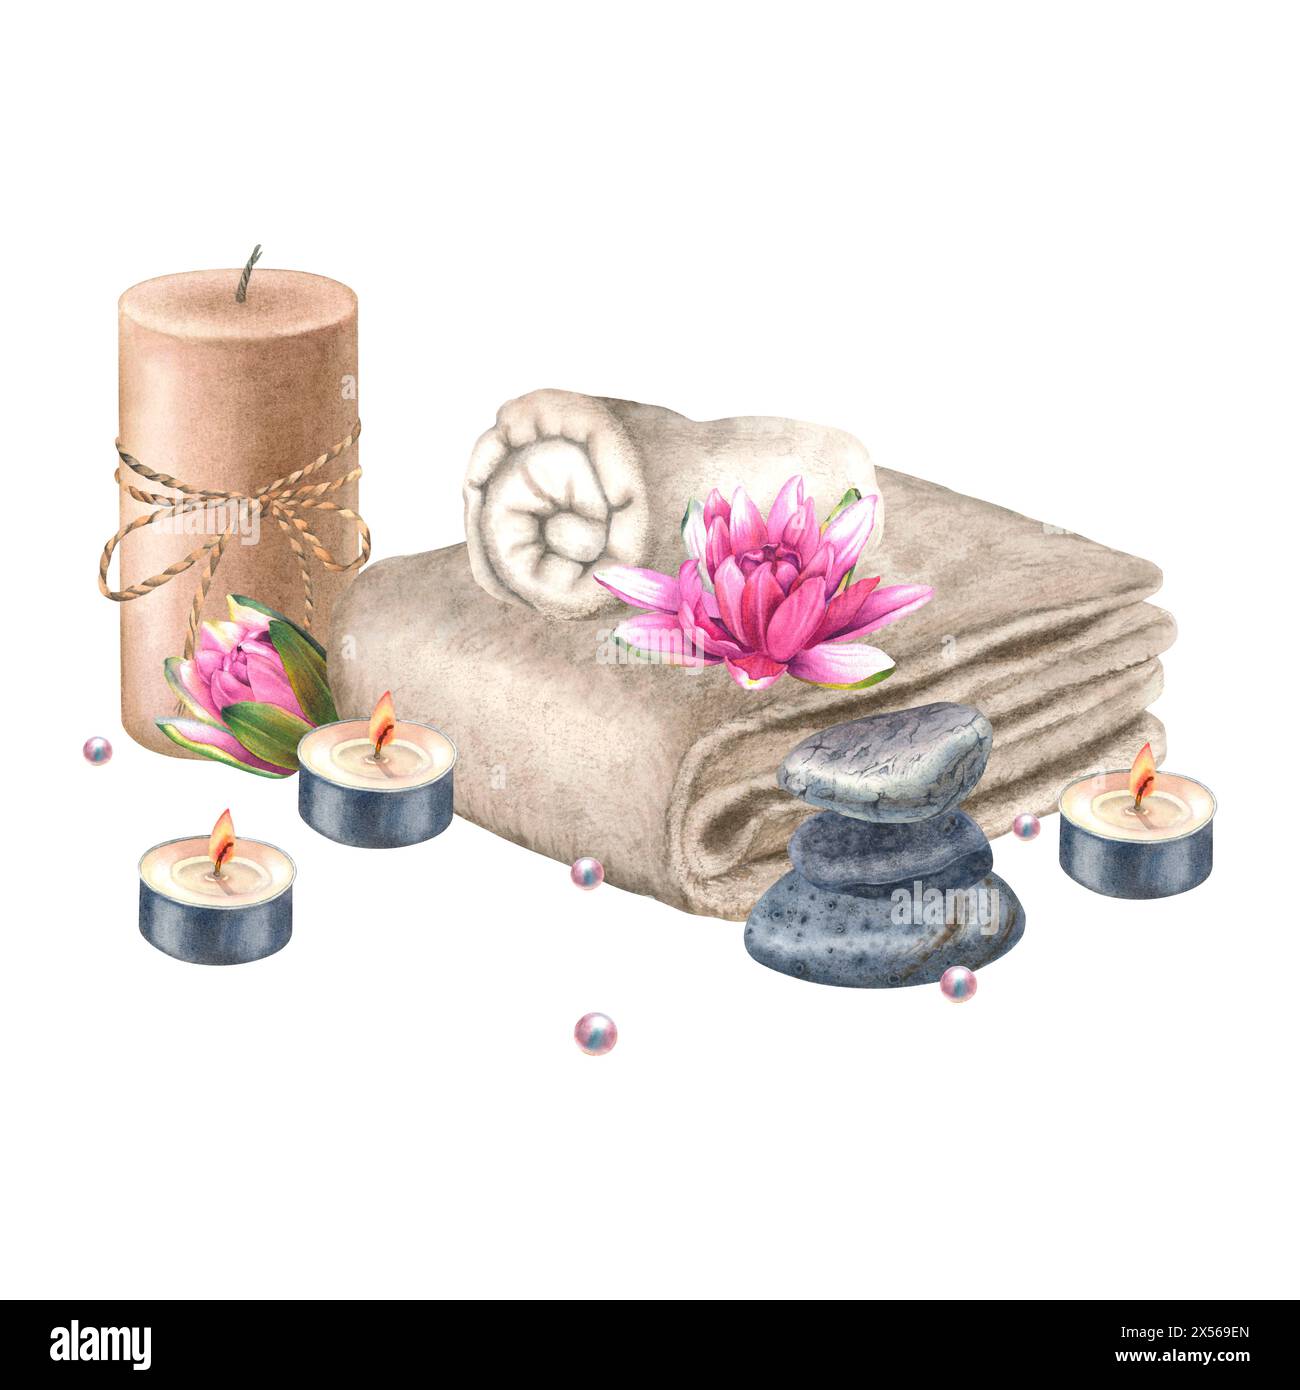 Neatly rolled up terry towel, pillar soy wax candle with jute rope bow, tea light candles, pyramid of balancing stones, water lily, beads. Hand drawn Stock Photo